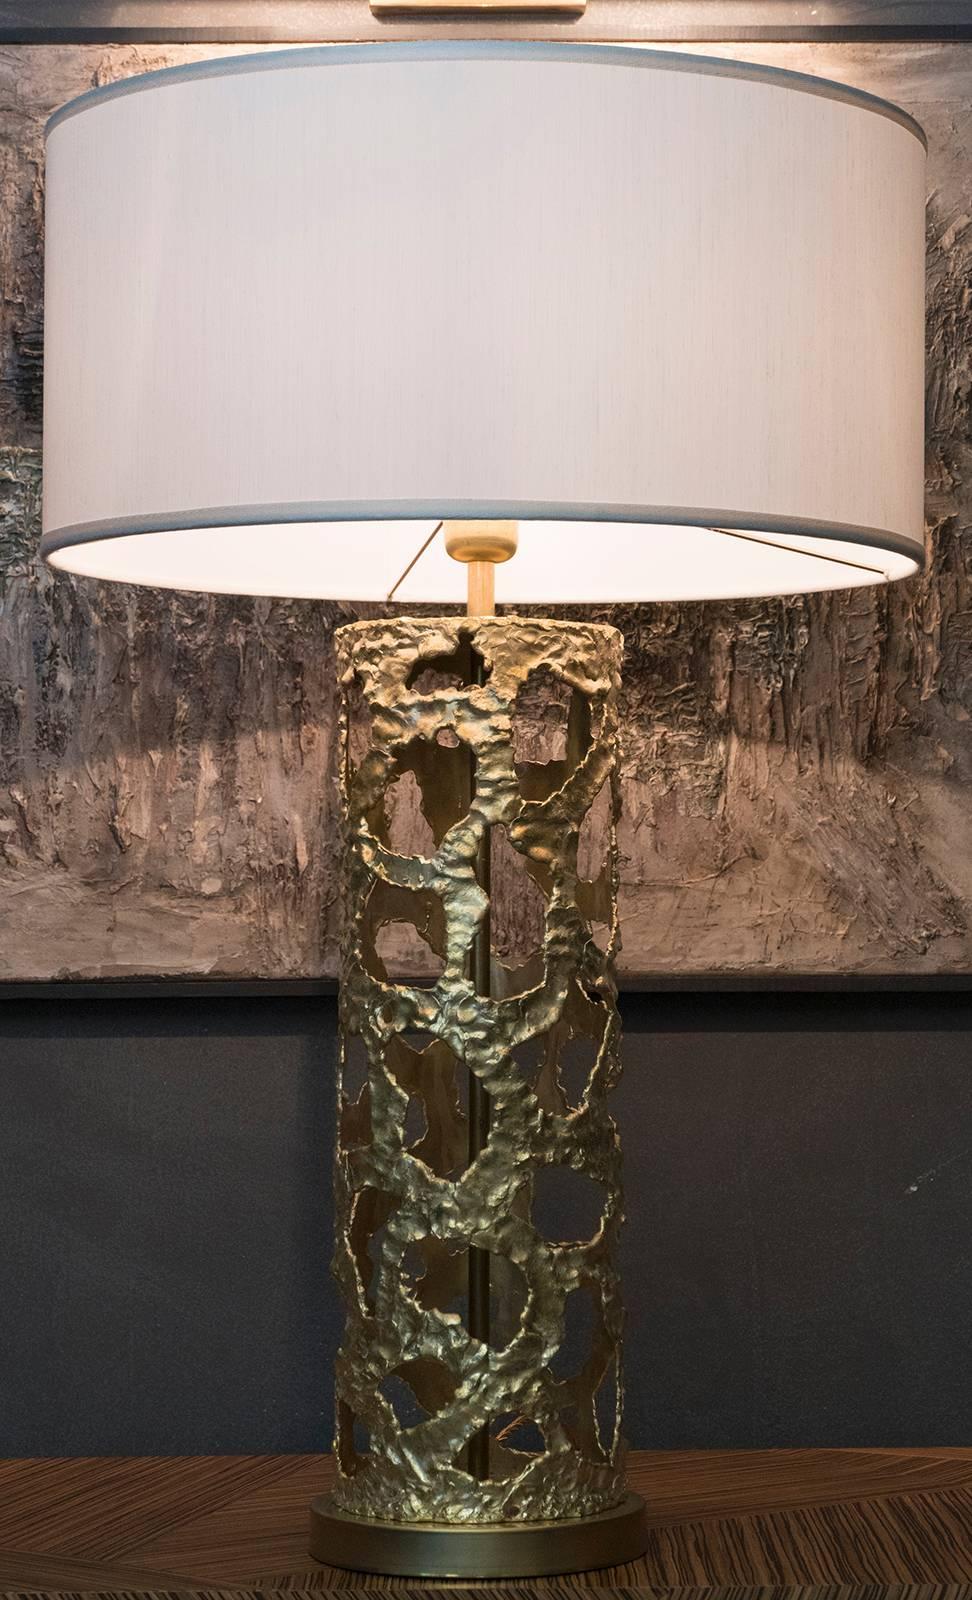 Table lamp  crafted by local artisans in natural brass without a lacquer finish., this gives the piece a vintage patina that is the main characteristic of the Flair edition, 
structure cm19 x H 60, white shantung lampshade cm50 x H 24, total high